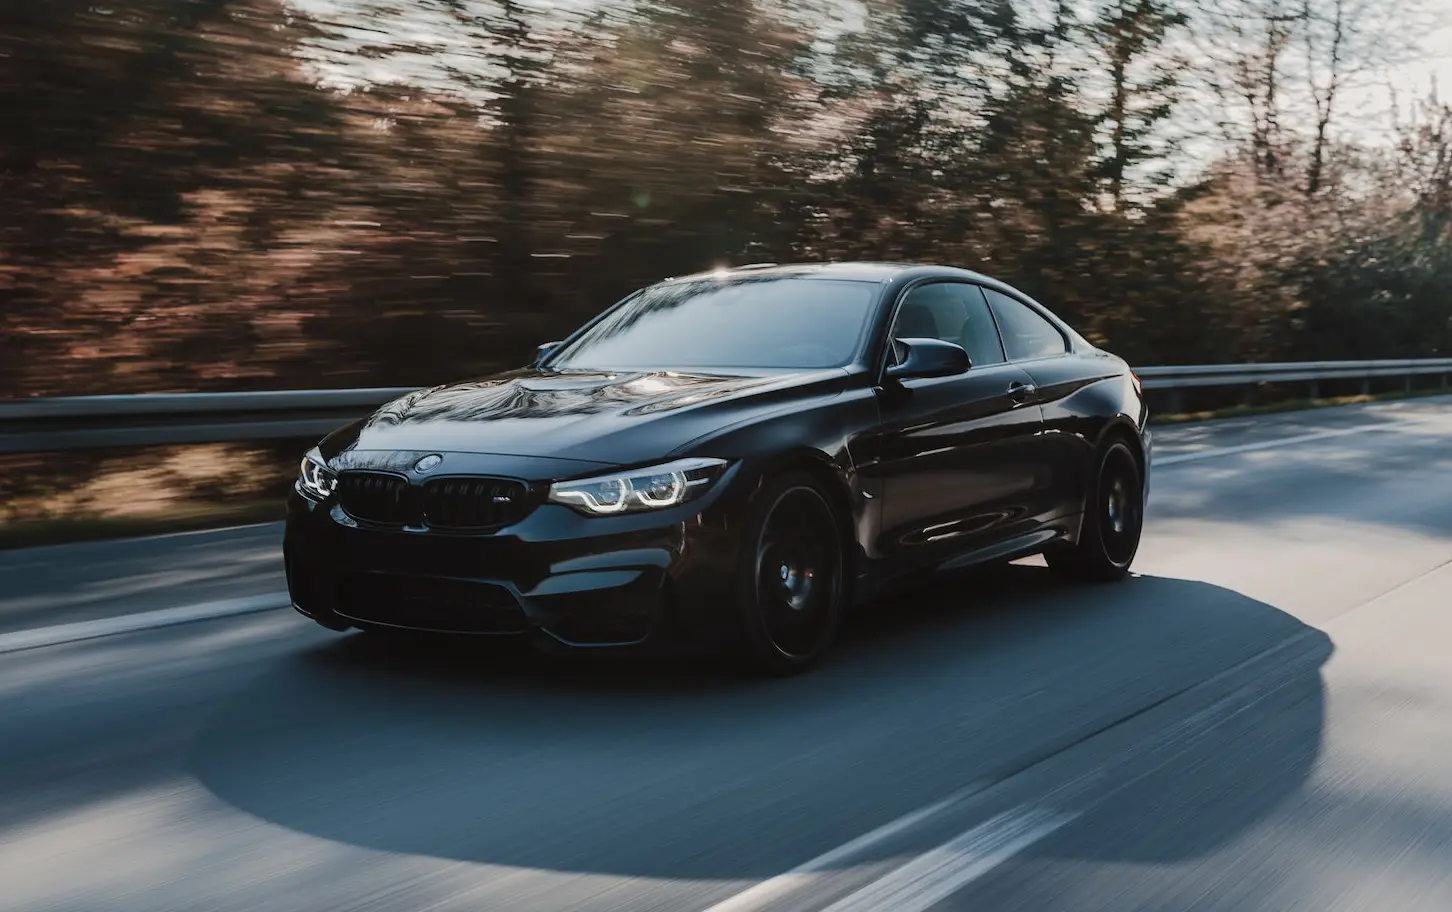 black bmw driving along smooth concrete road surrounded by trees